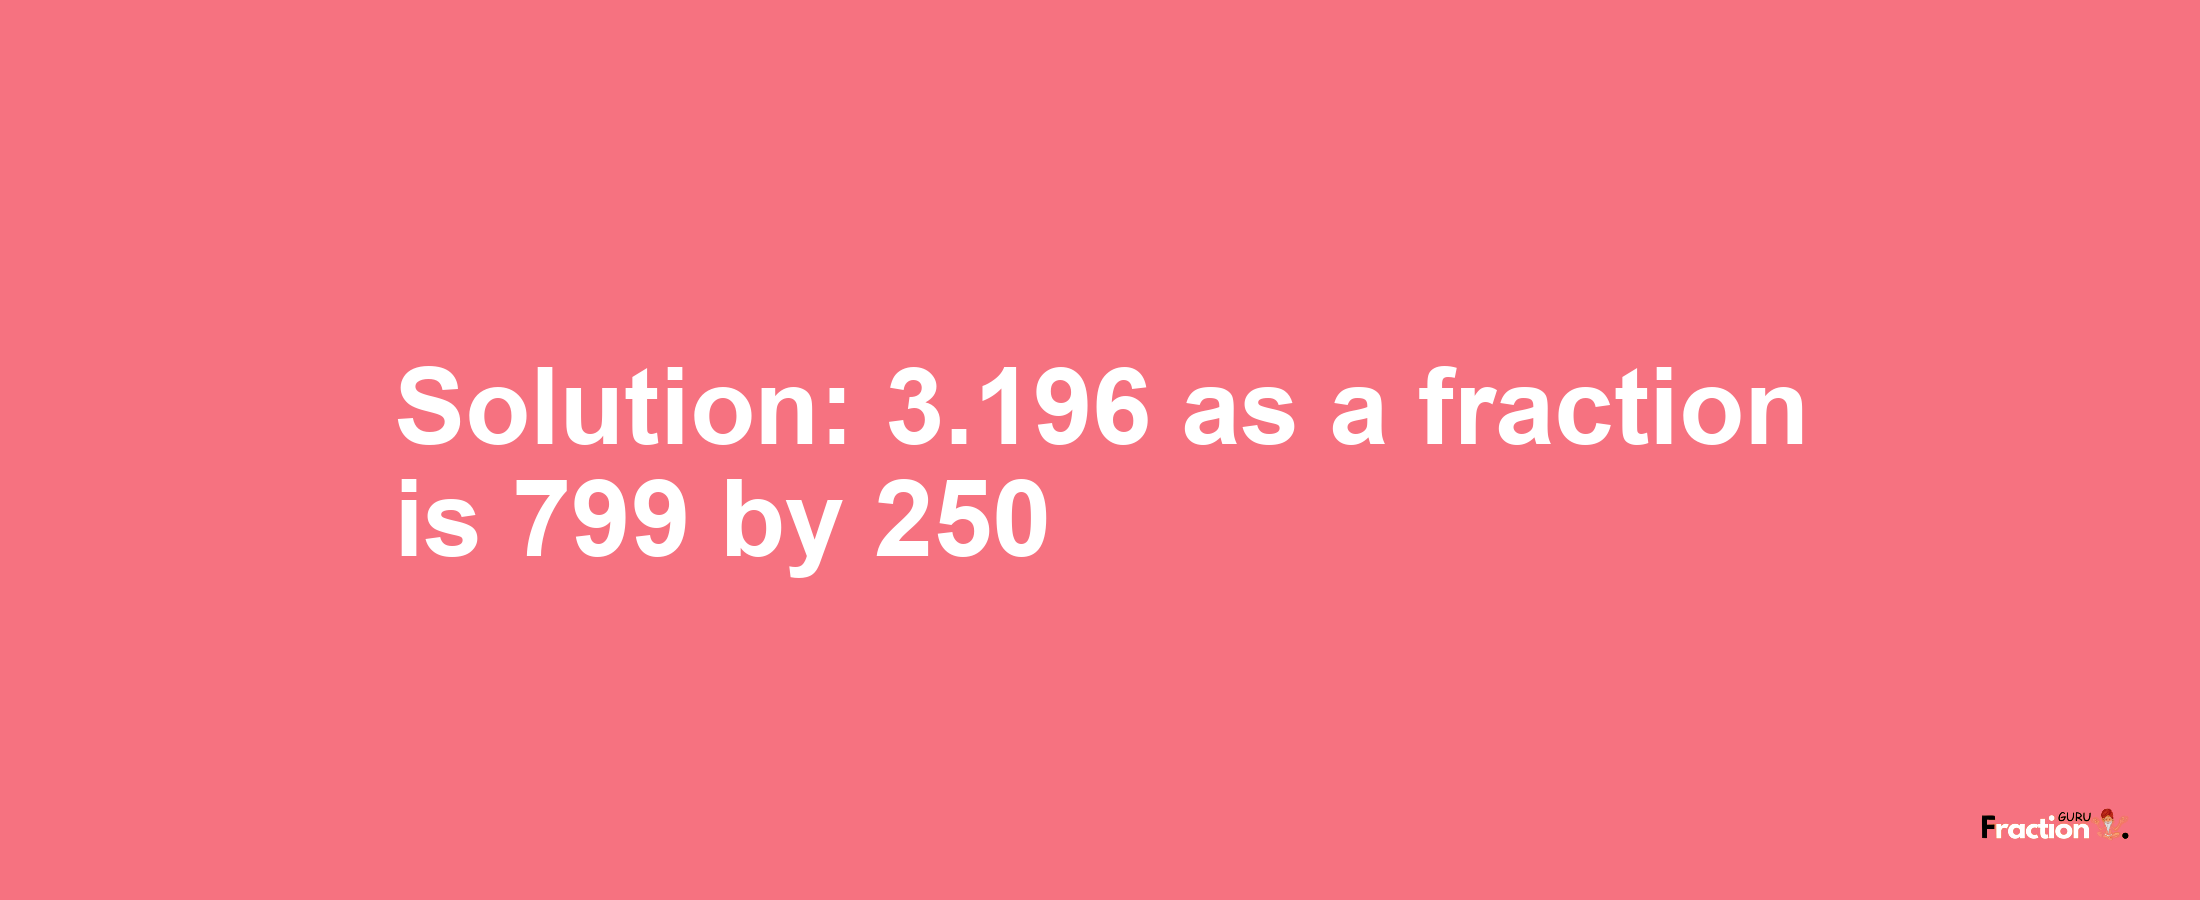 Solution:3.196 as a fraction is 799/250